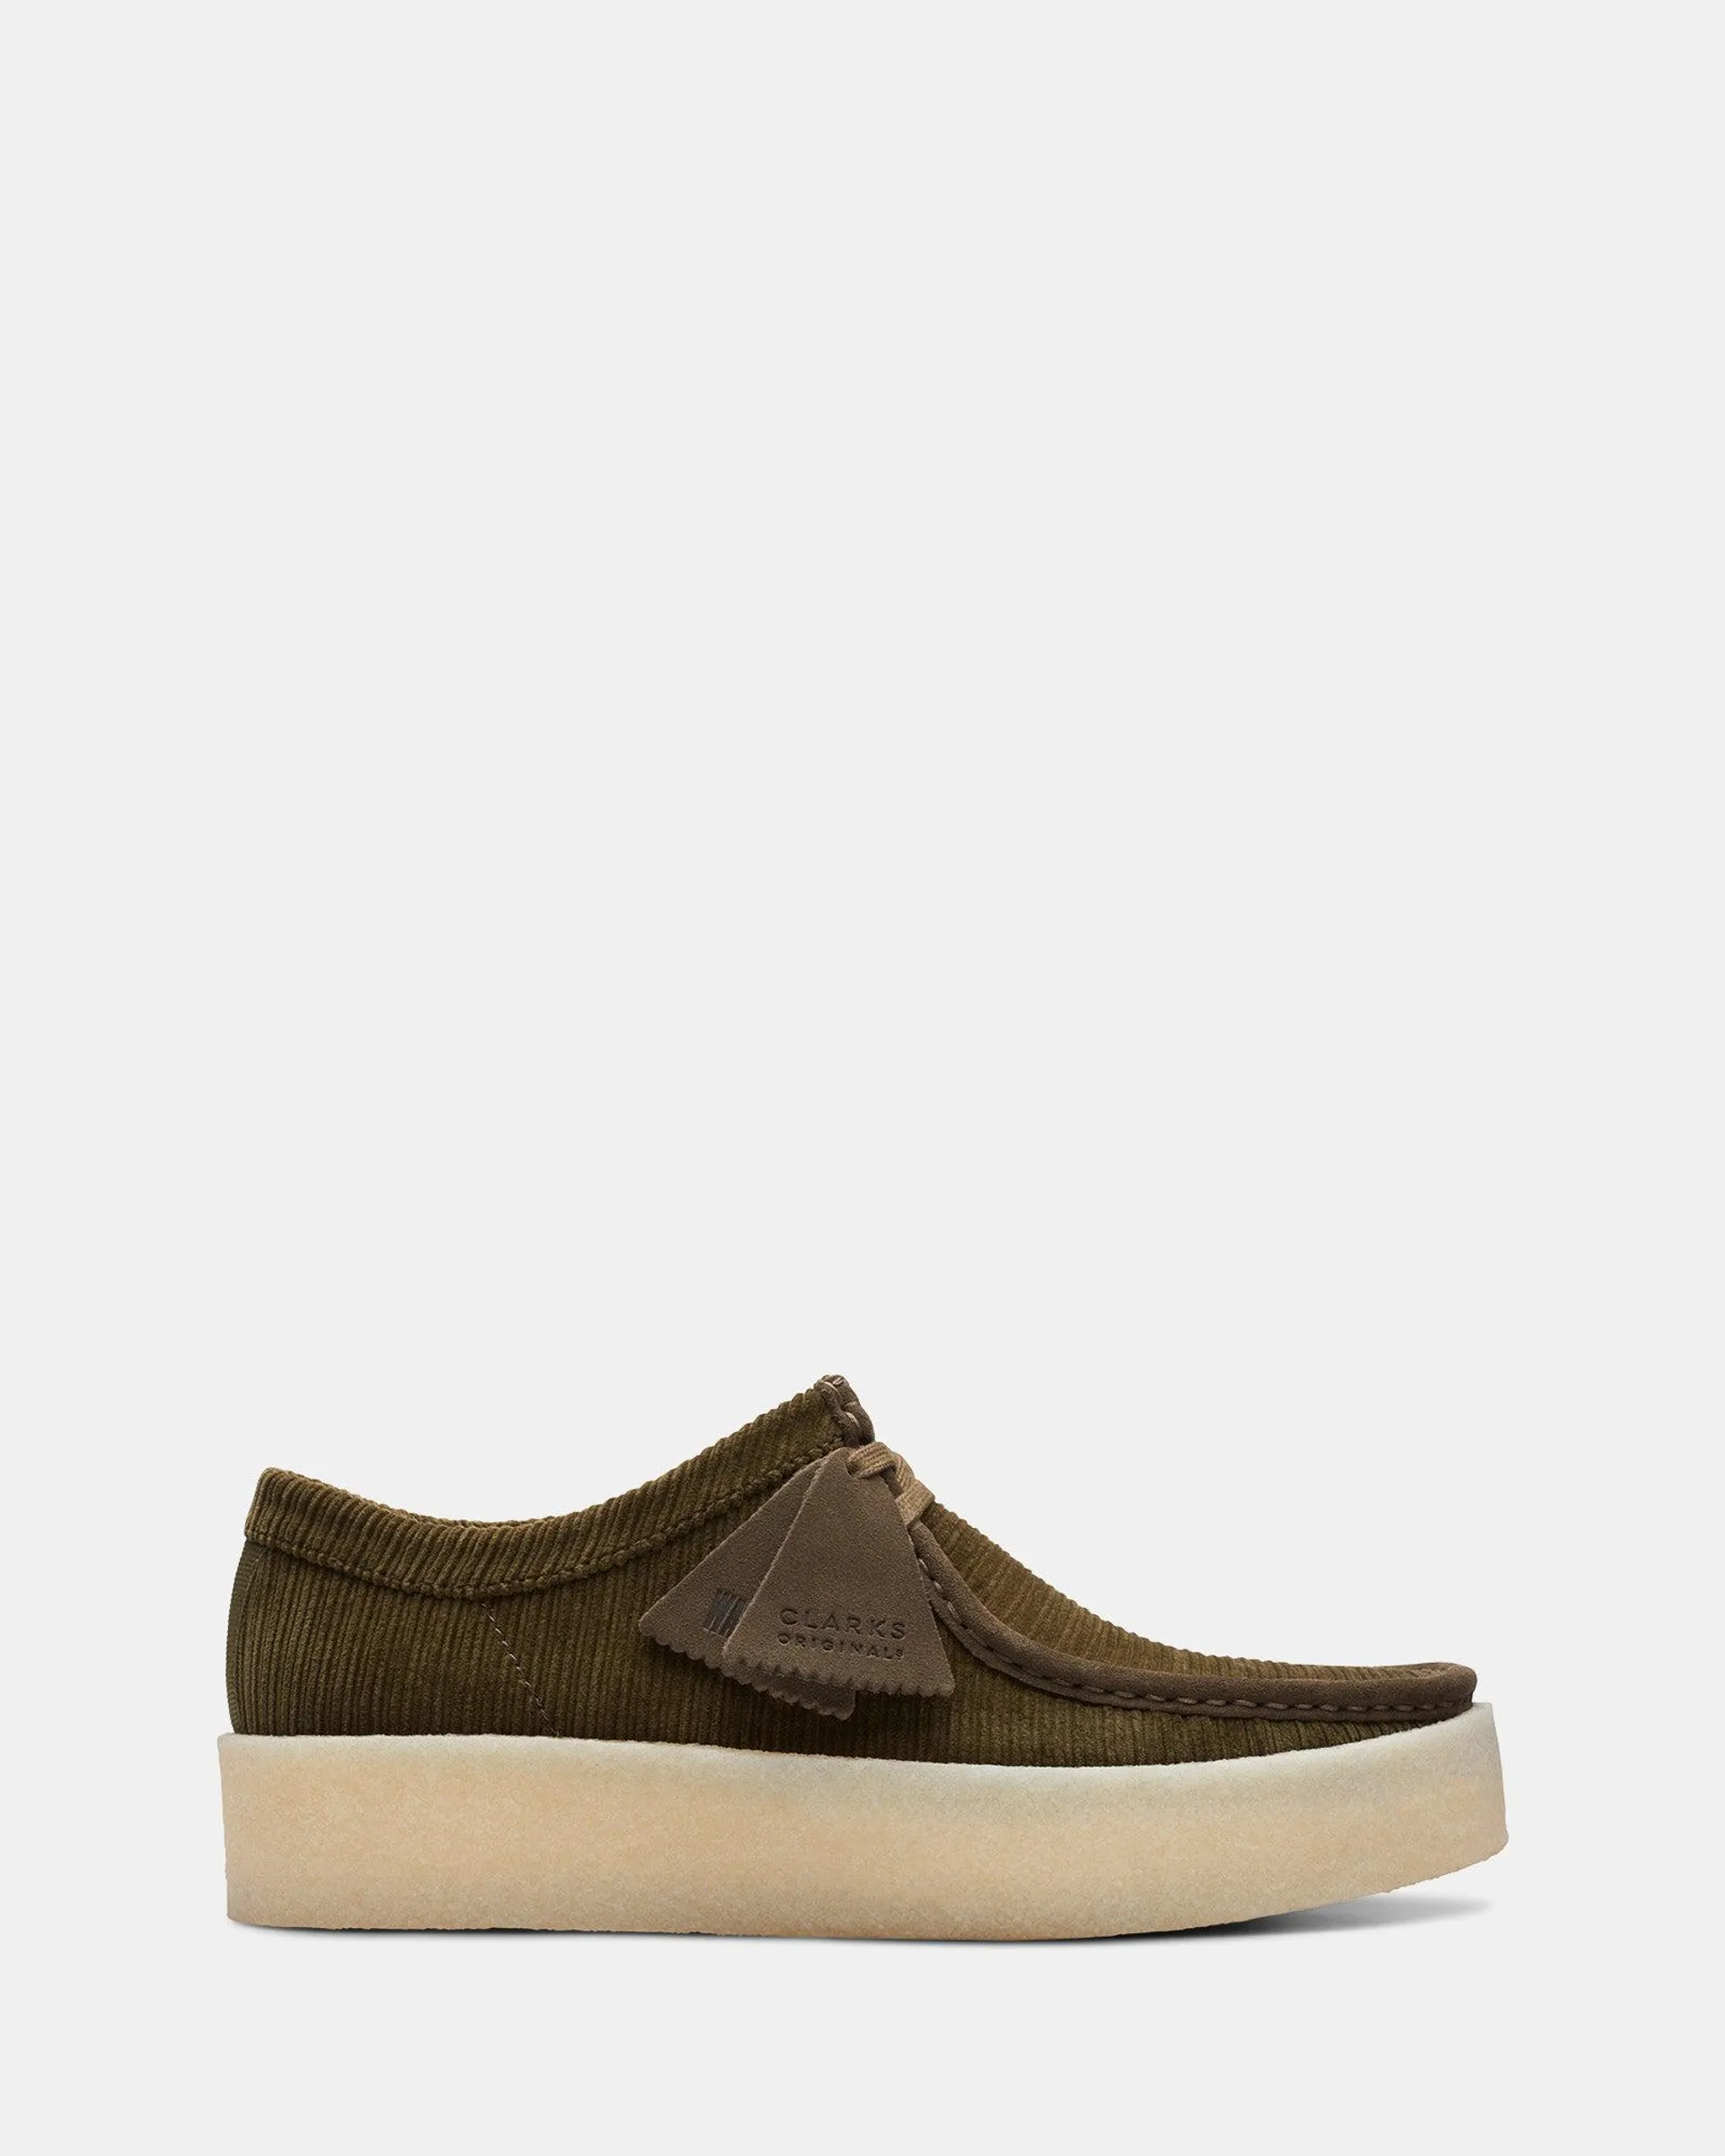 WALLABEE CUP (M)